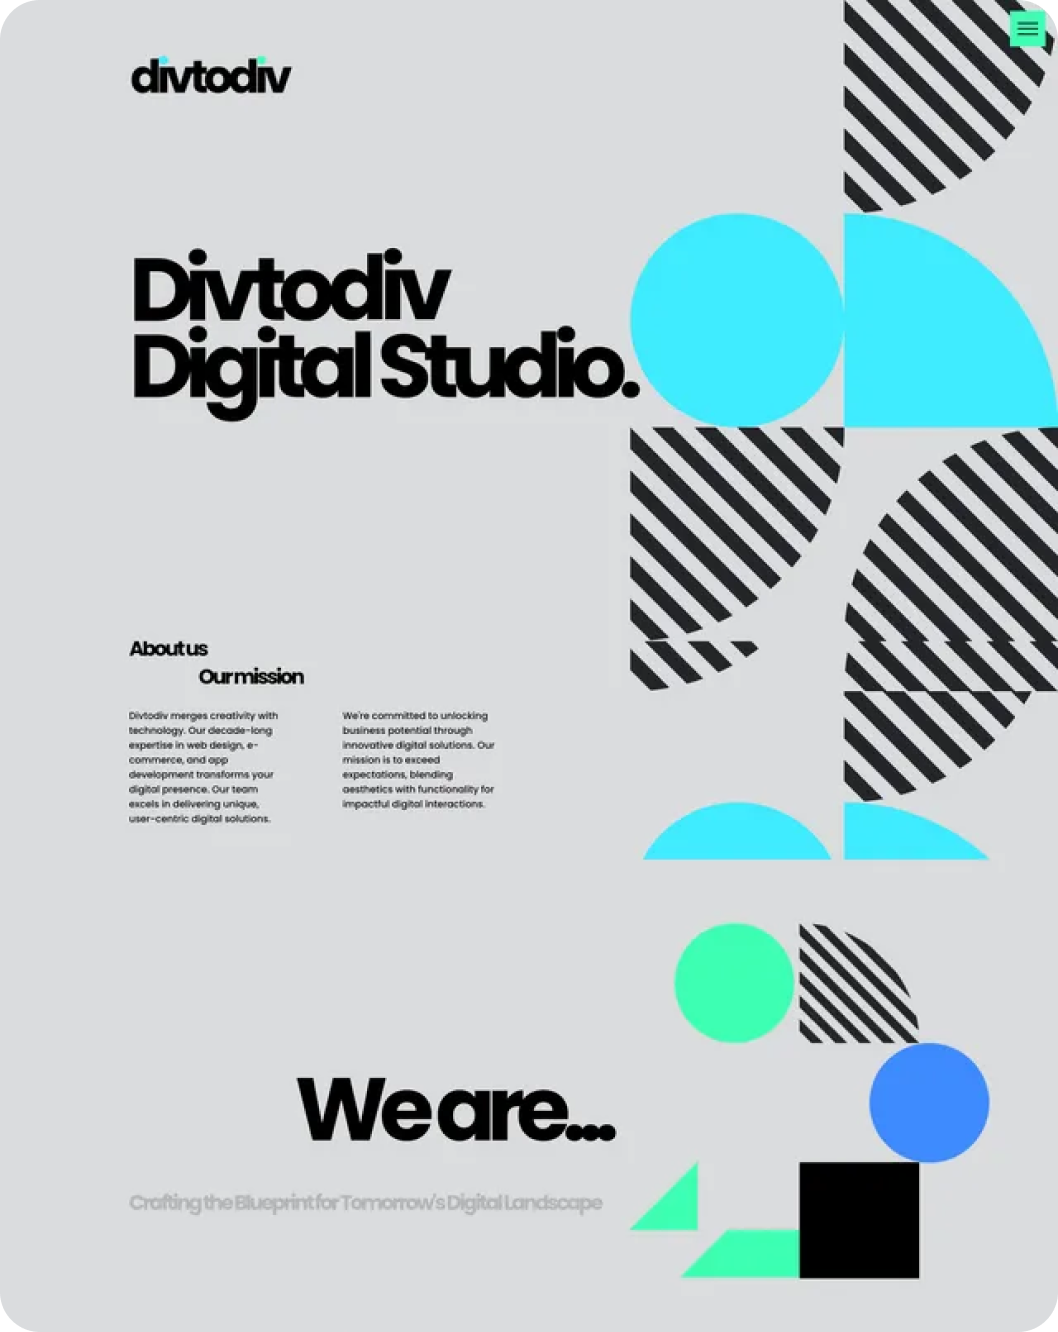 A poster for divtodiv digital studio says we are